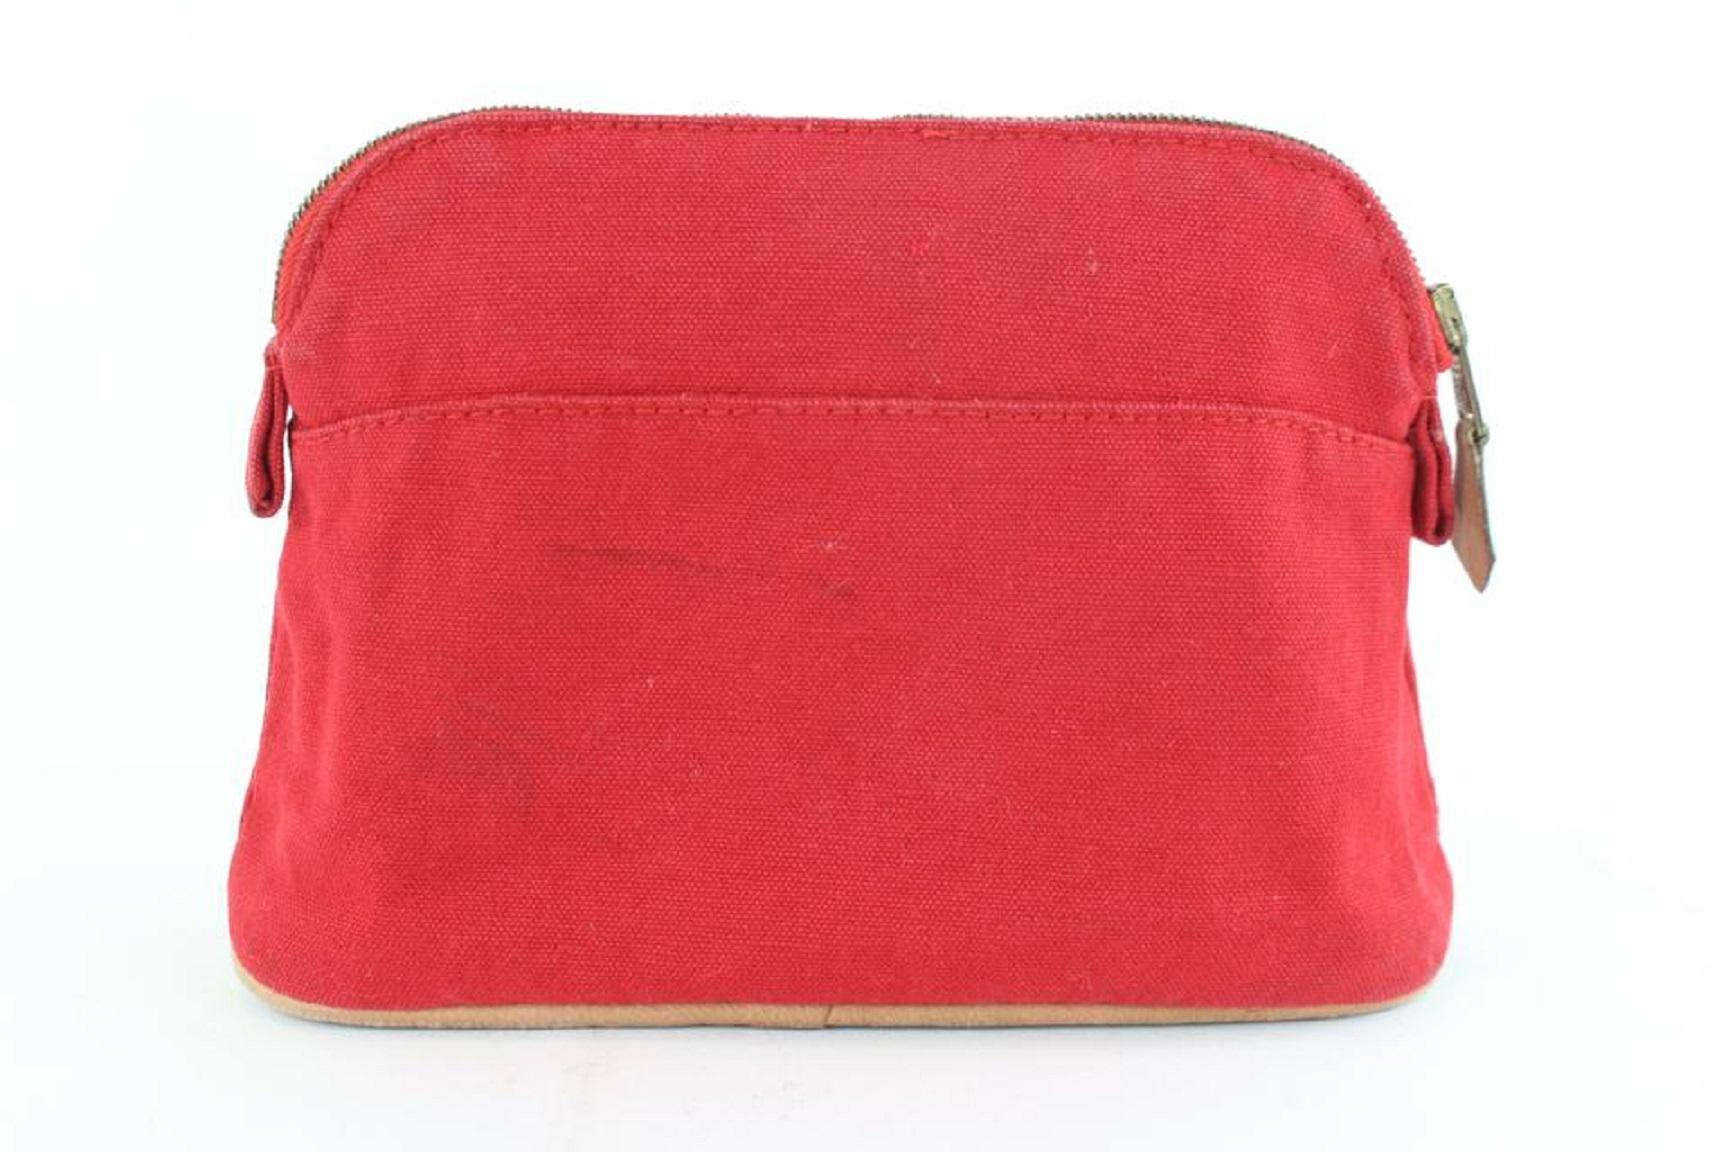 Hermès Bolide Cosmetic Make Up Pouch 230796 Red Canvas Clutch 1